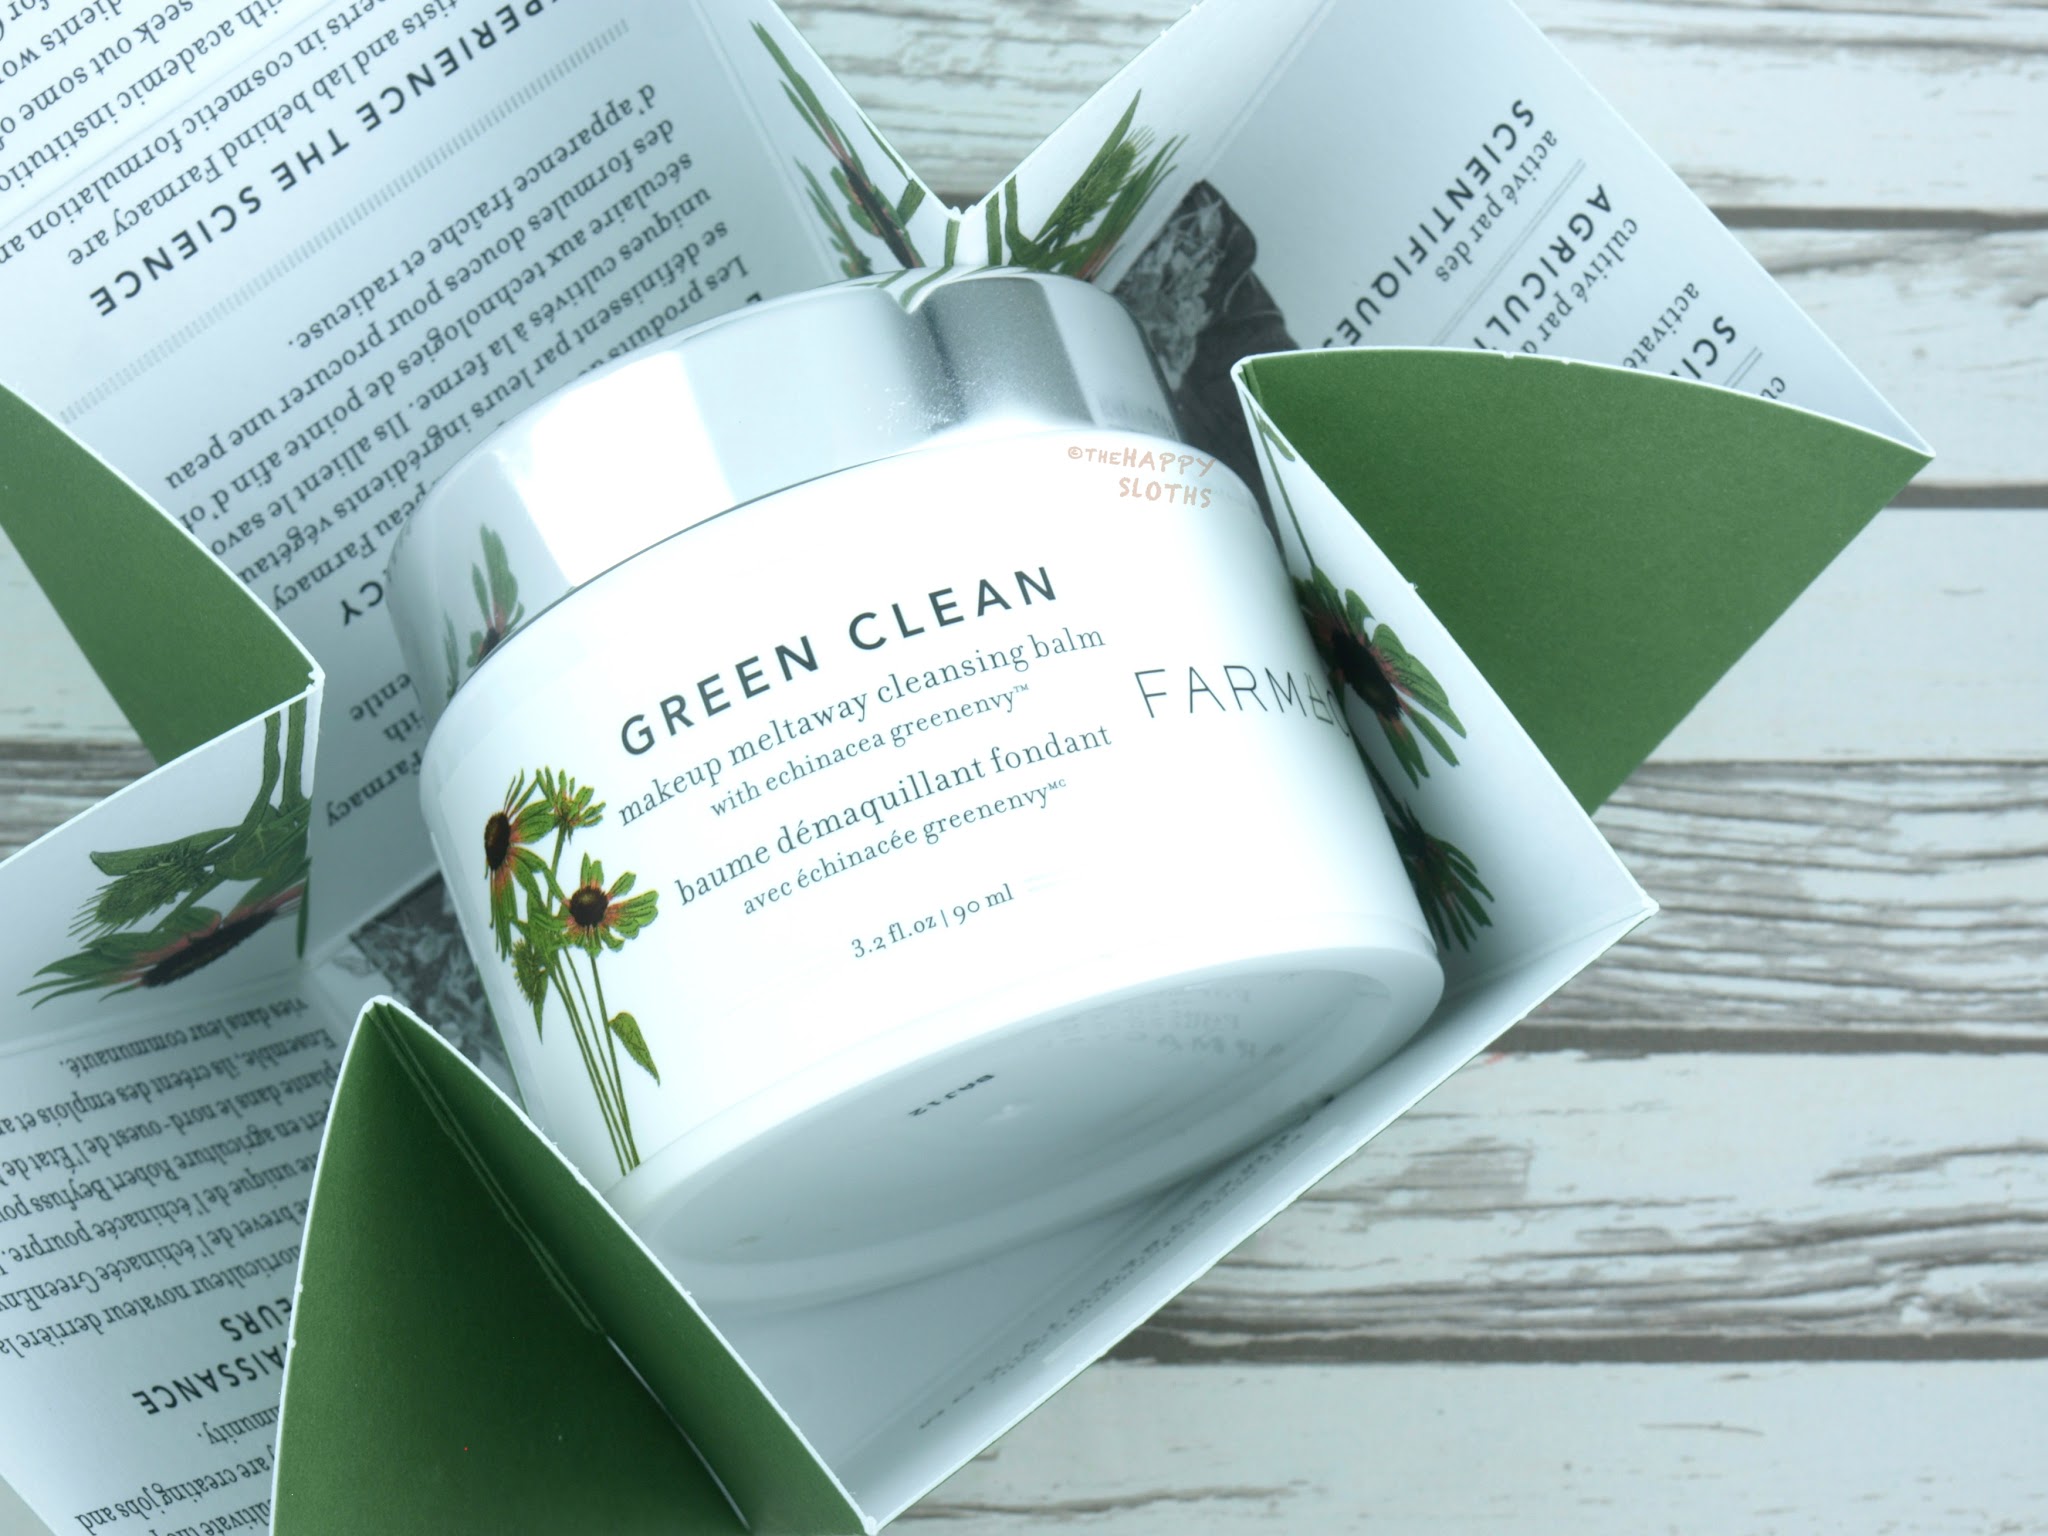 Farmacy Green Clean Makeup Meltaway Cleansing Balm: Review